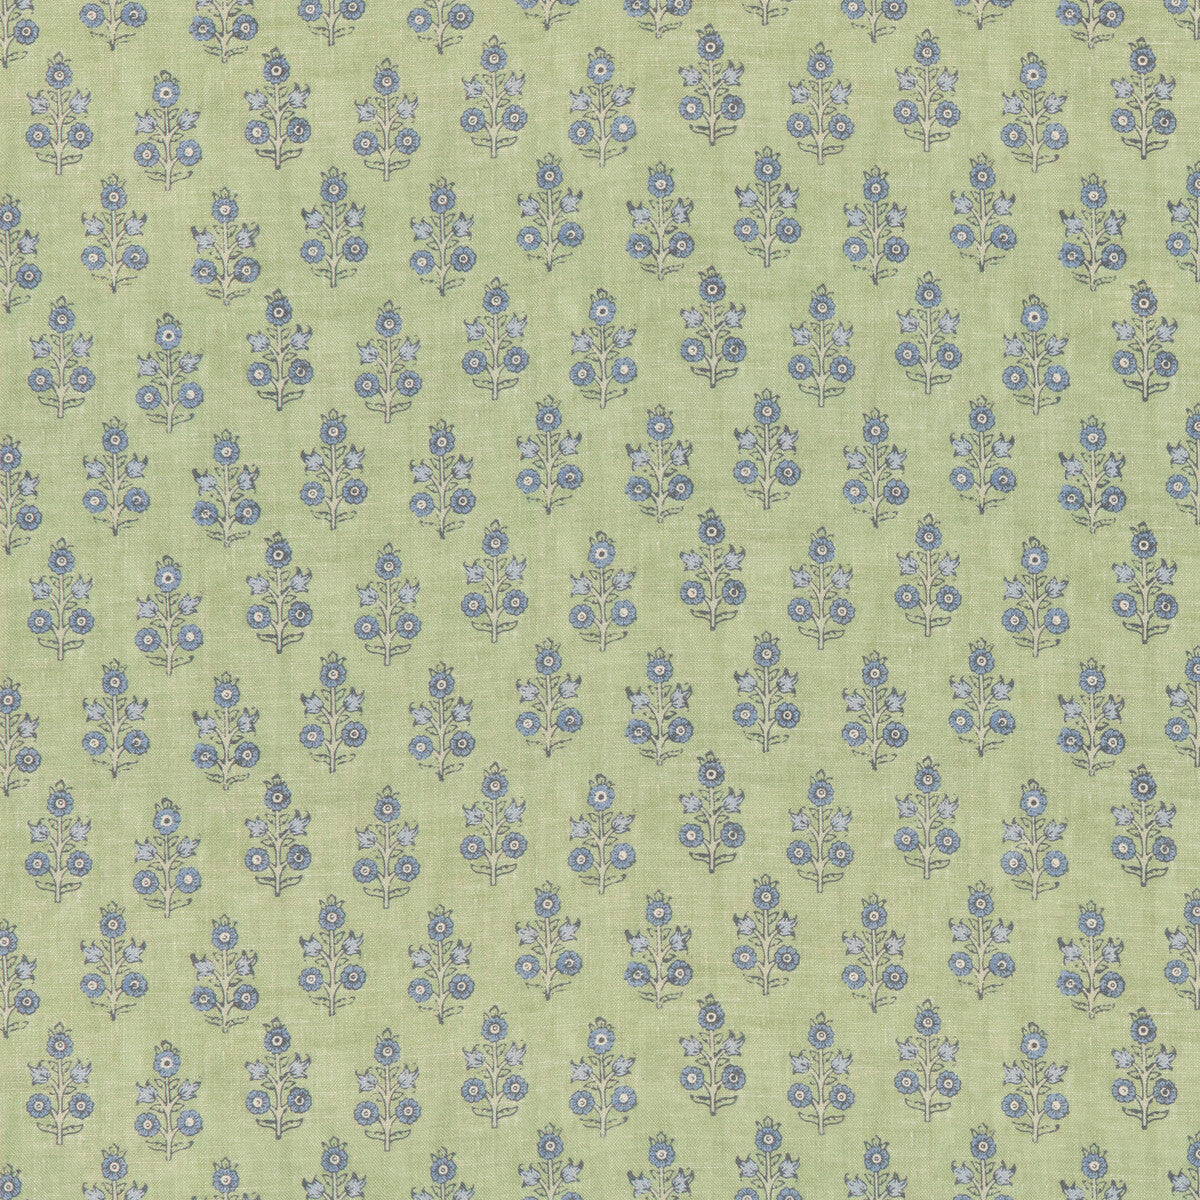 Poppy Sprig fabric in green/blue color - pattern BP11003.2.0 - by G P &amp; J Baker in the House Small Prints collection